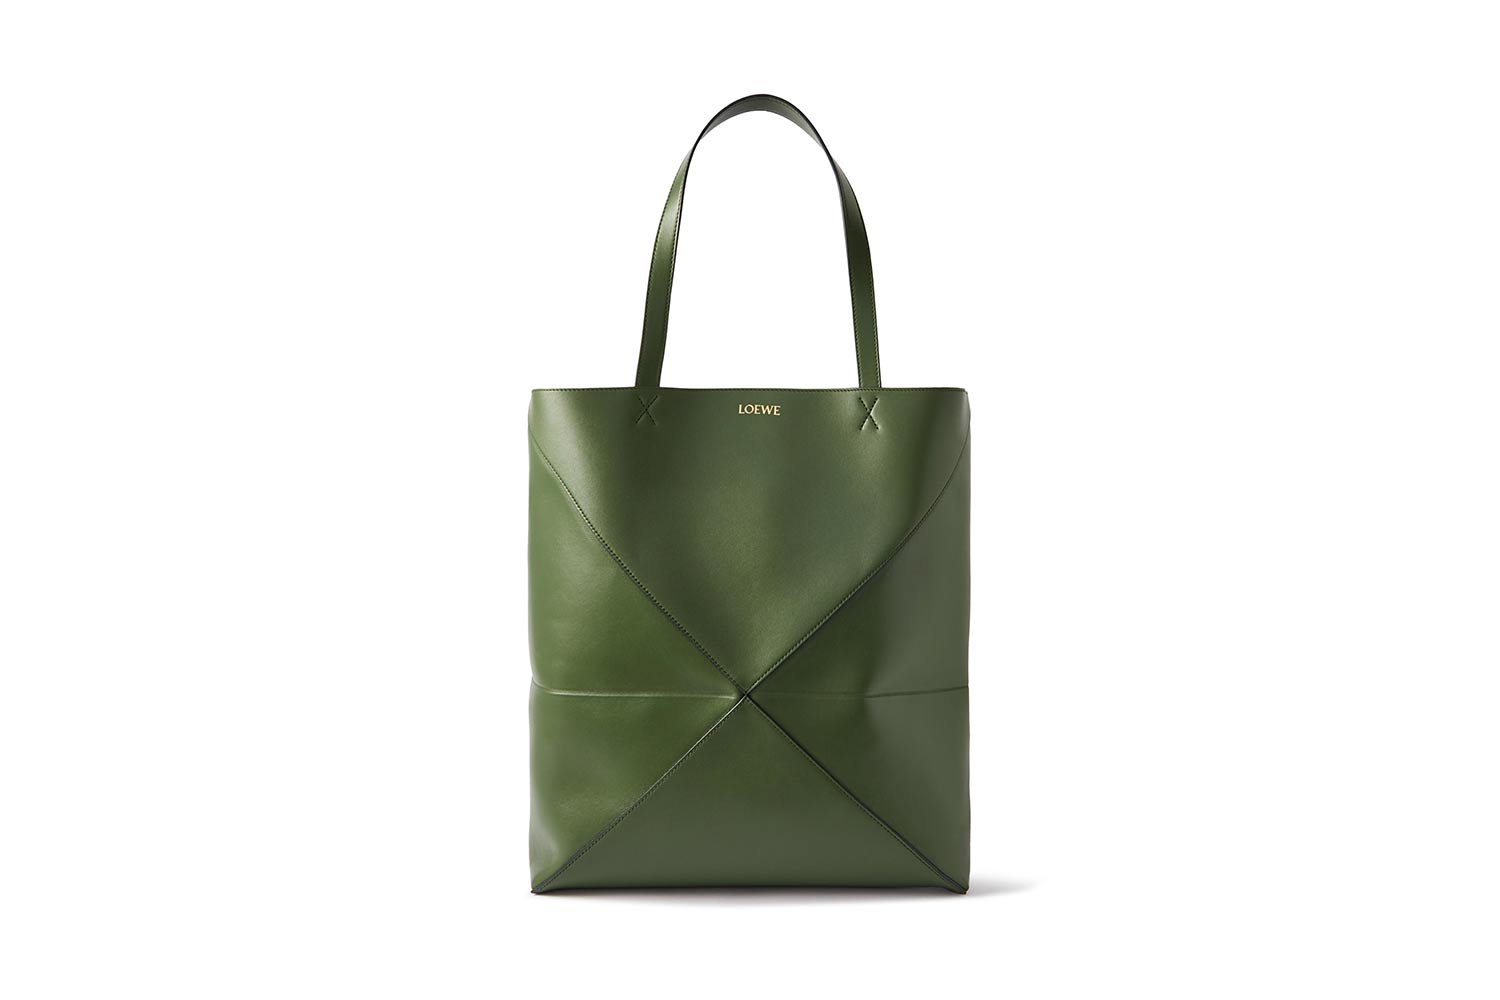 Green bag on a white background